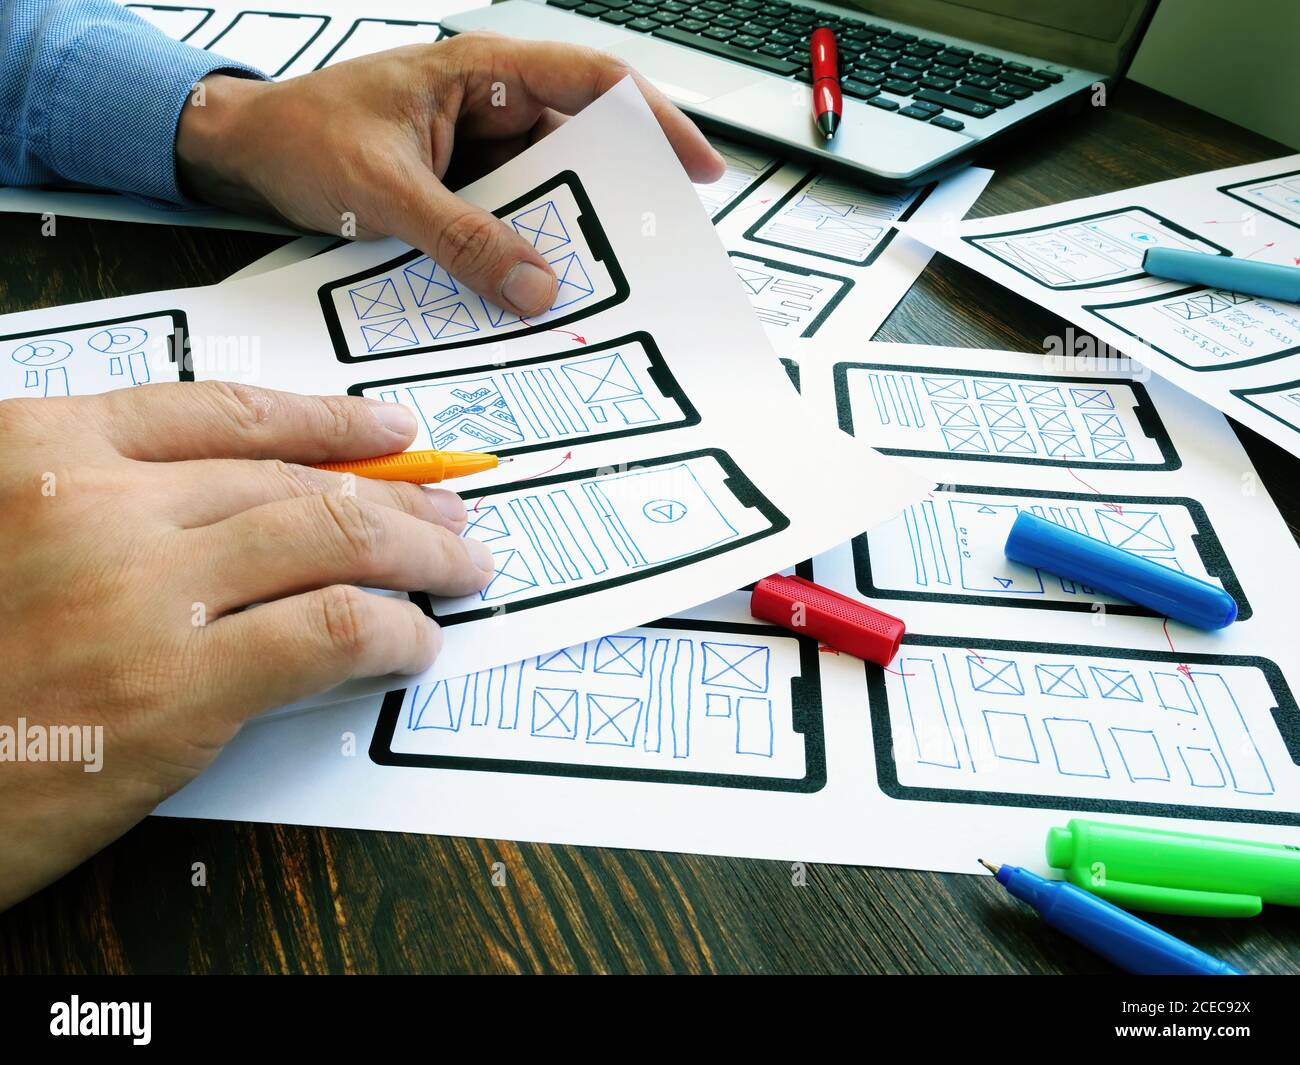 Ux ui designer working with web mobile app sketches. Stock Photo